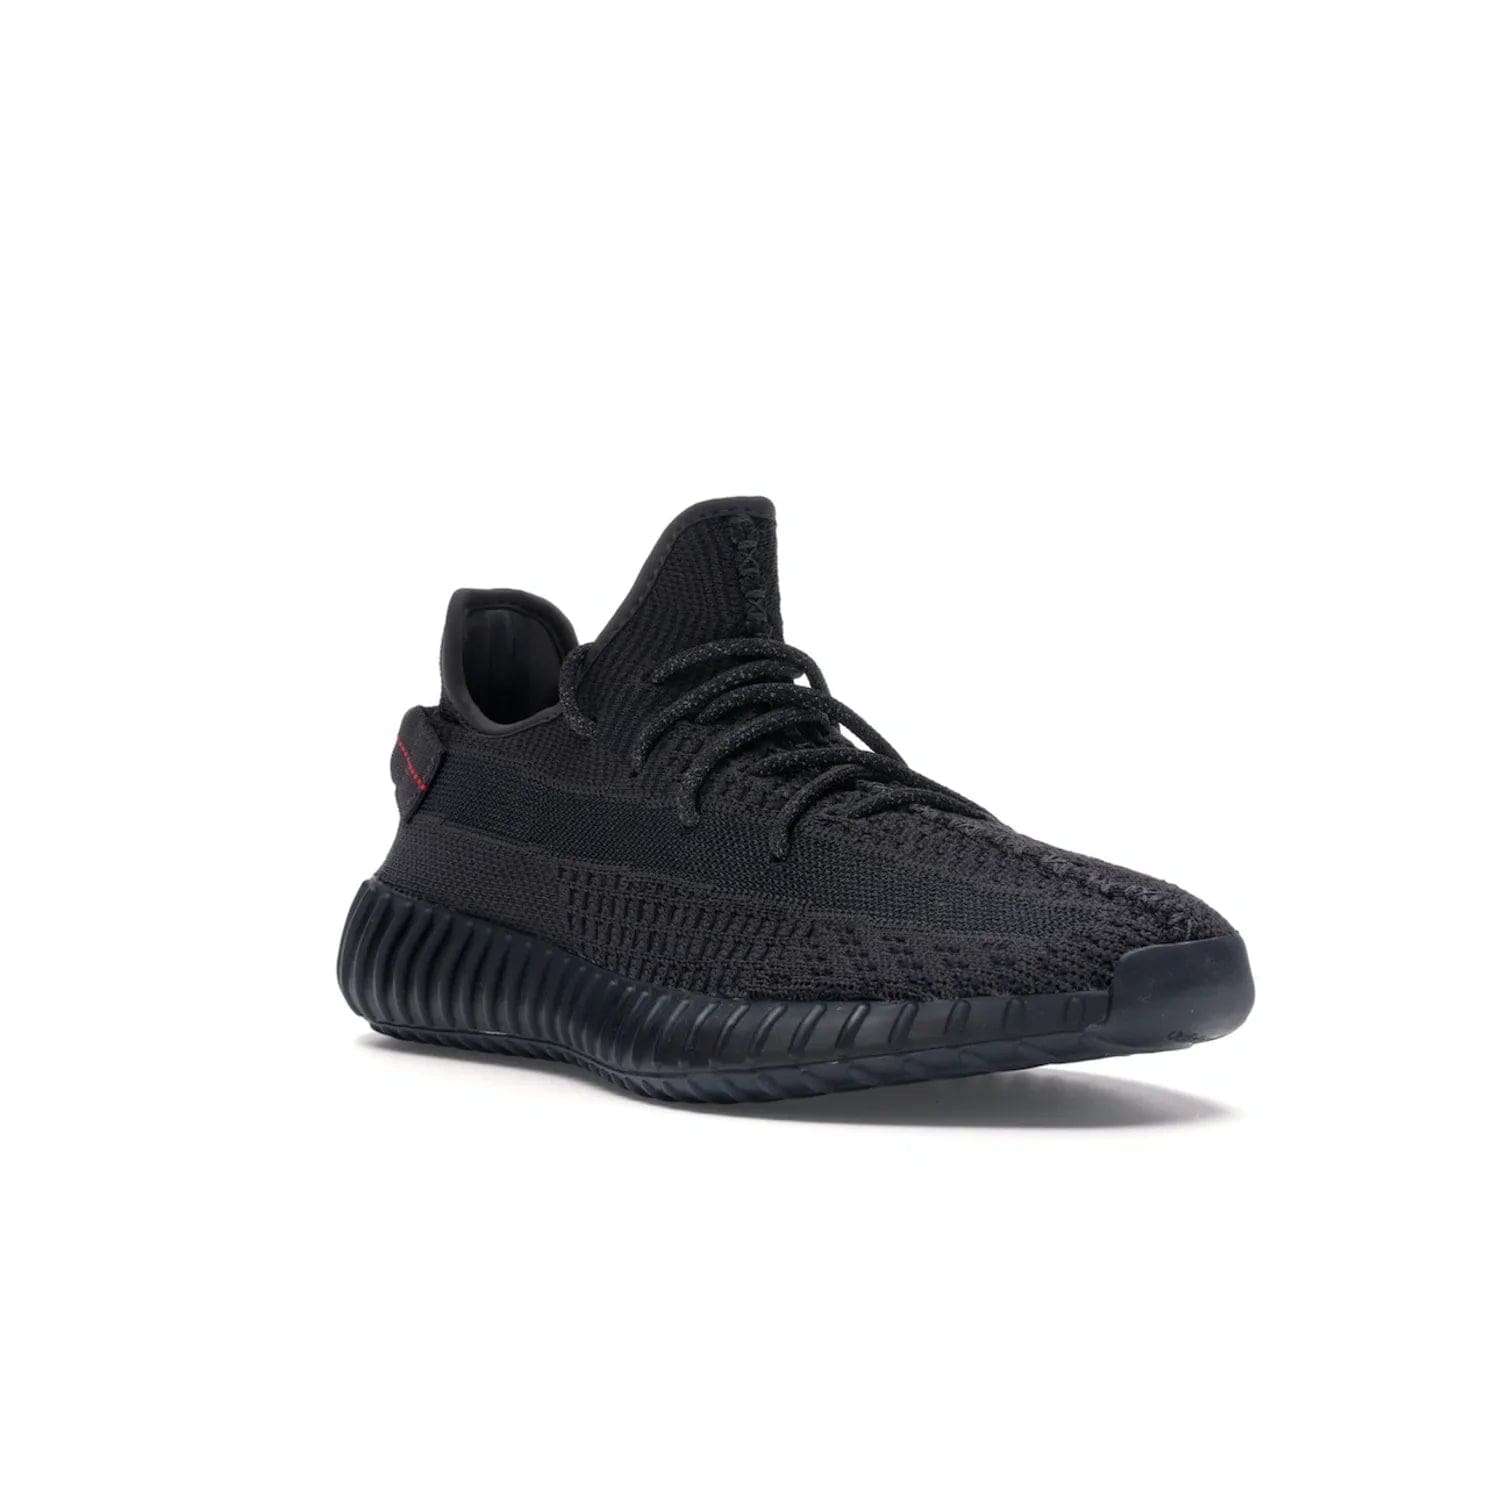 adidas Yeezy Boost 350 V2 Black (Non-Reflective) - Image 6 - Only at www.BallersClubKickz.com - A timeless, sleek silhouette crafted from quality materials. The adidas Yeezy Boost 350 V2 Black (Non-Reflective) brings style and sophistication. Get yours now!